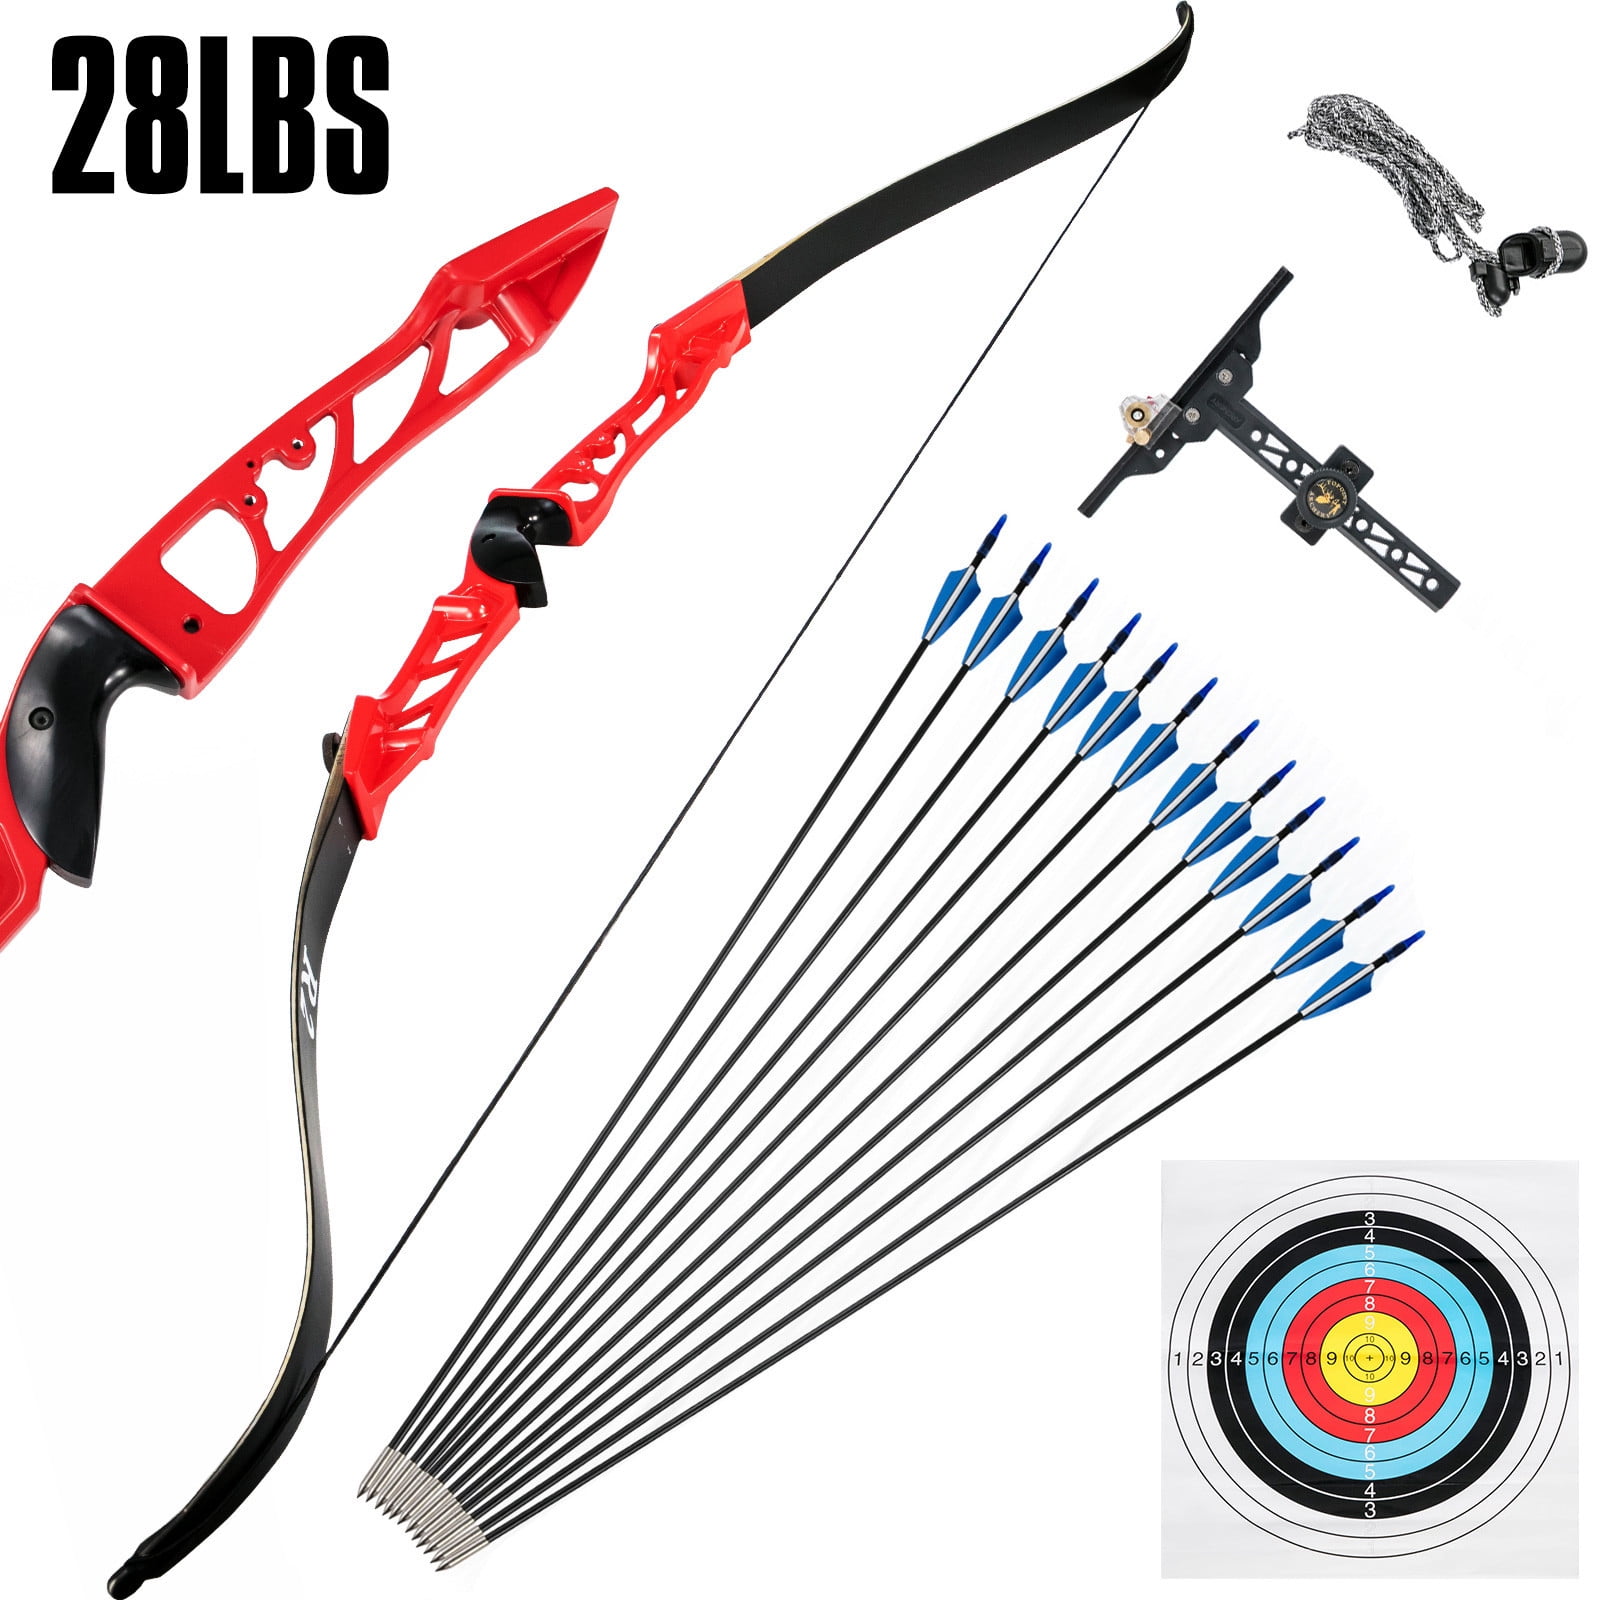 Details about   Recurve Bow Traditional Hunting Wooden Archery Bow Outdoor Target Shooting Tools 